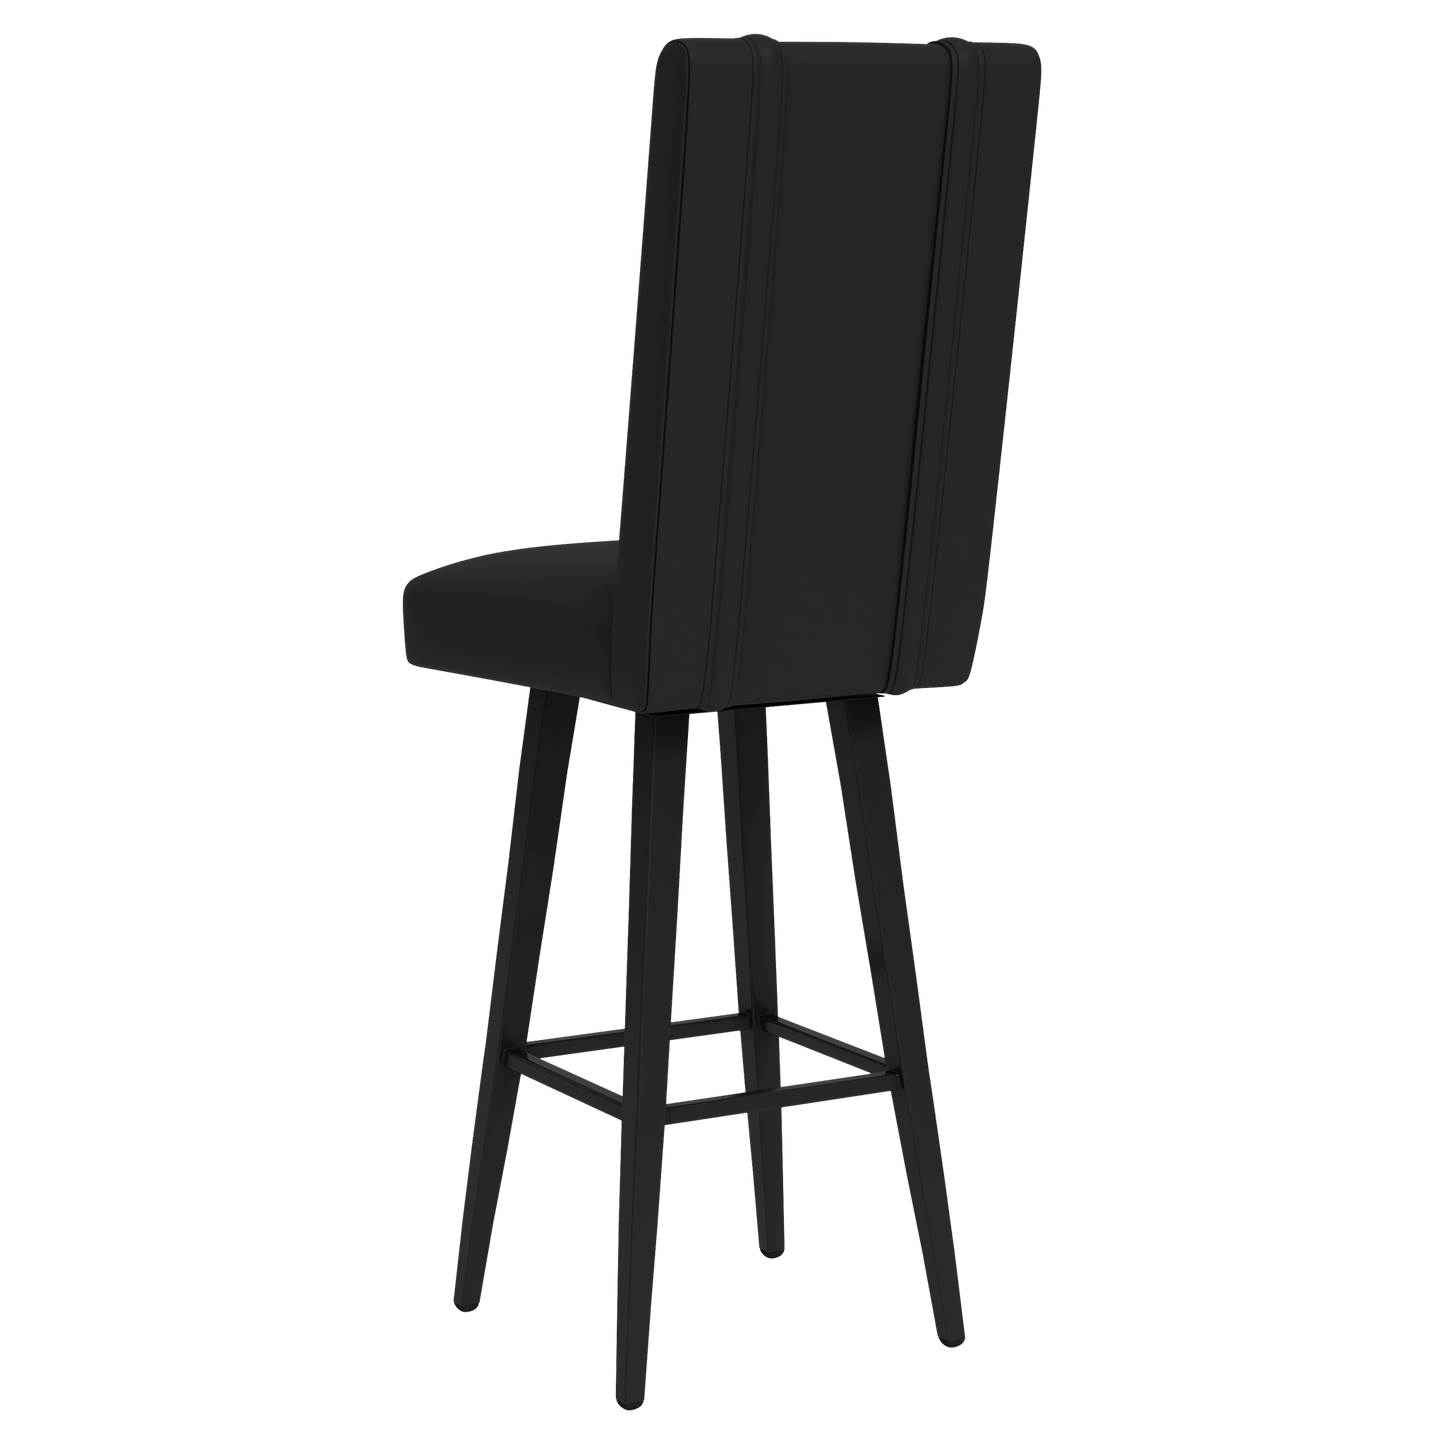 Swivel Bar Stool 2000 with Detroit Tigers Cooperstown